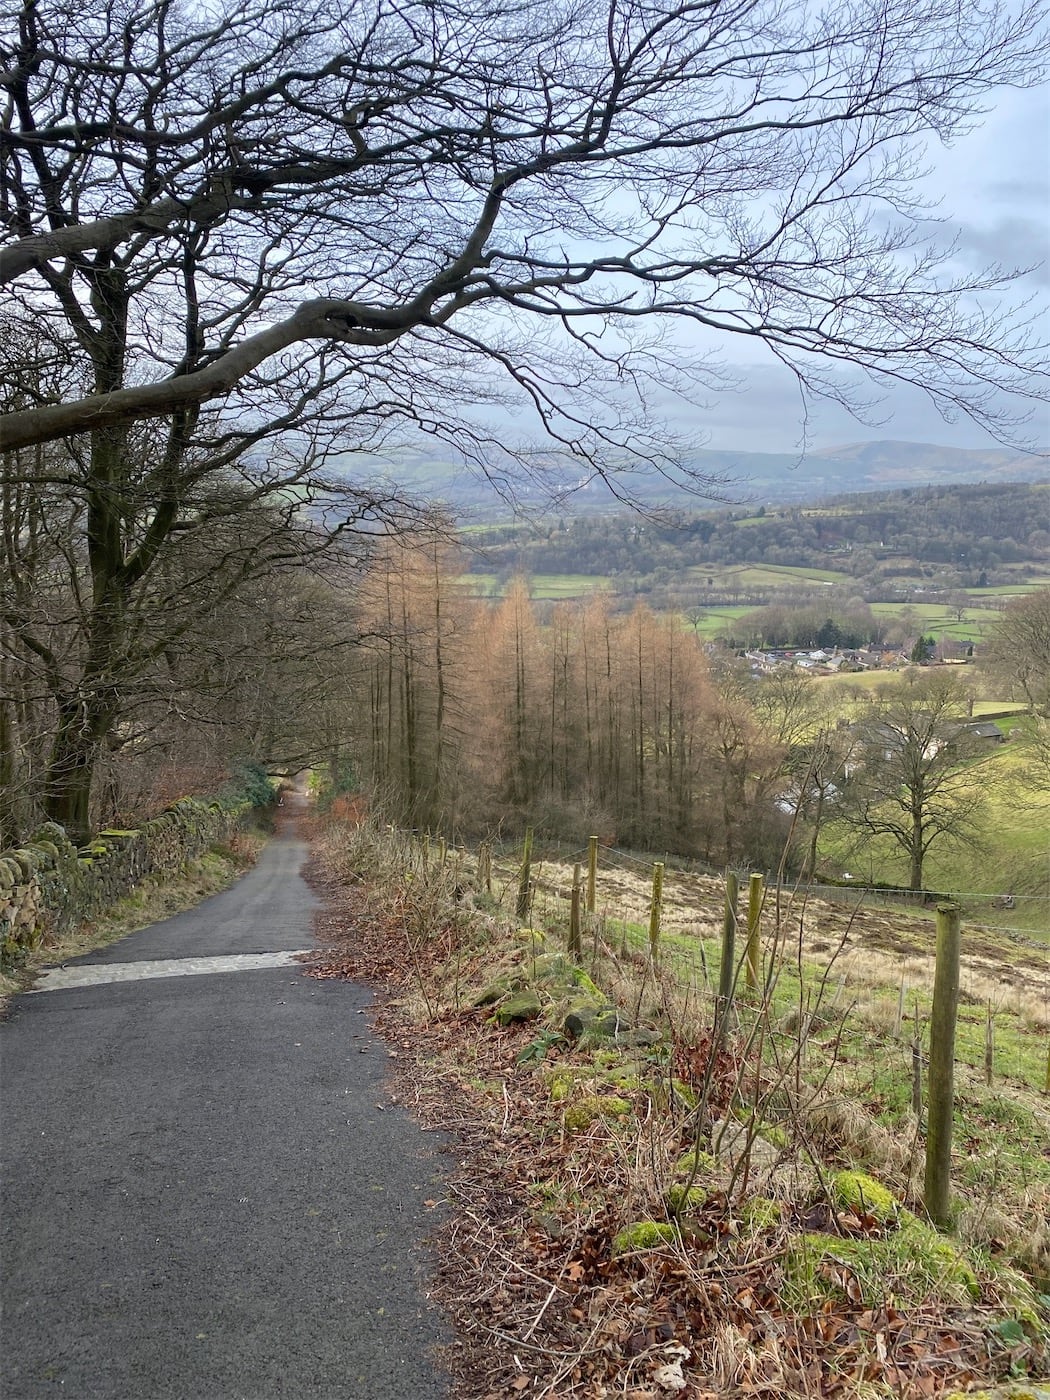 It doesn’t look it but this road turned byway is so steep I had to take breaks every 50m or so – going down!